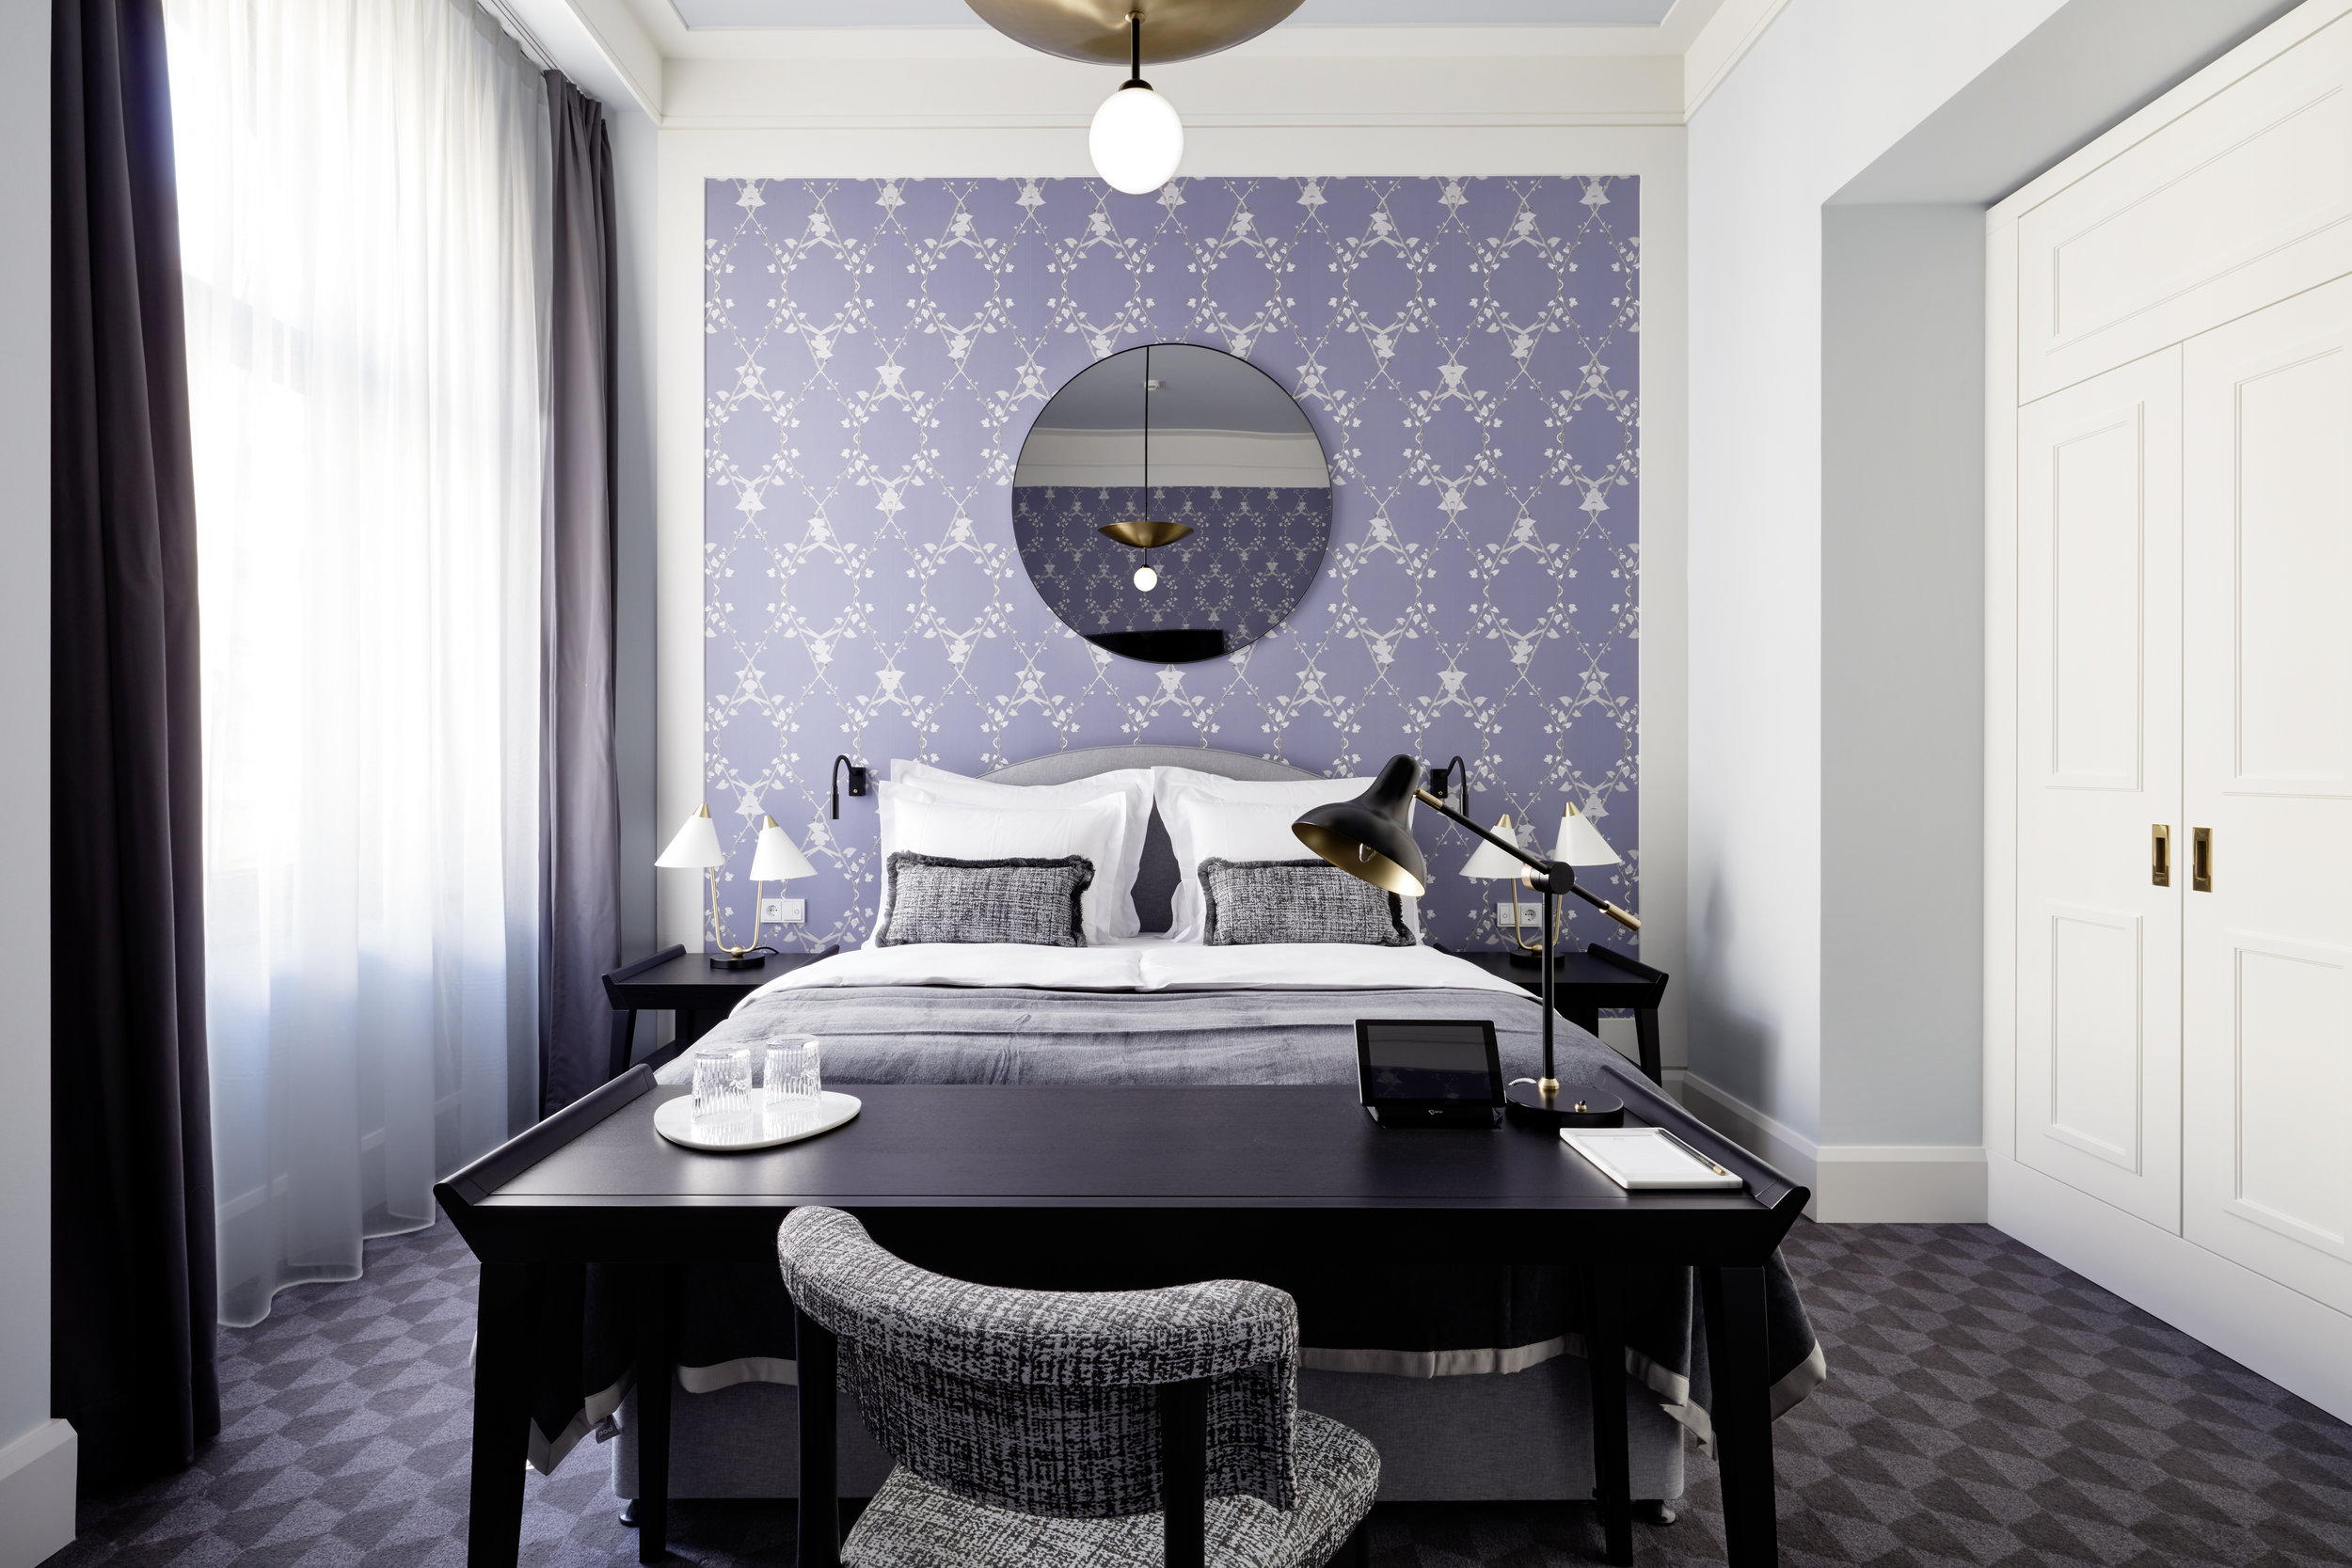 Deluxe room with Morning Glory wallpaper in custom Lavender